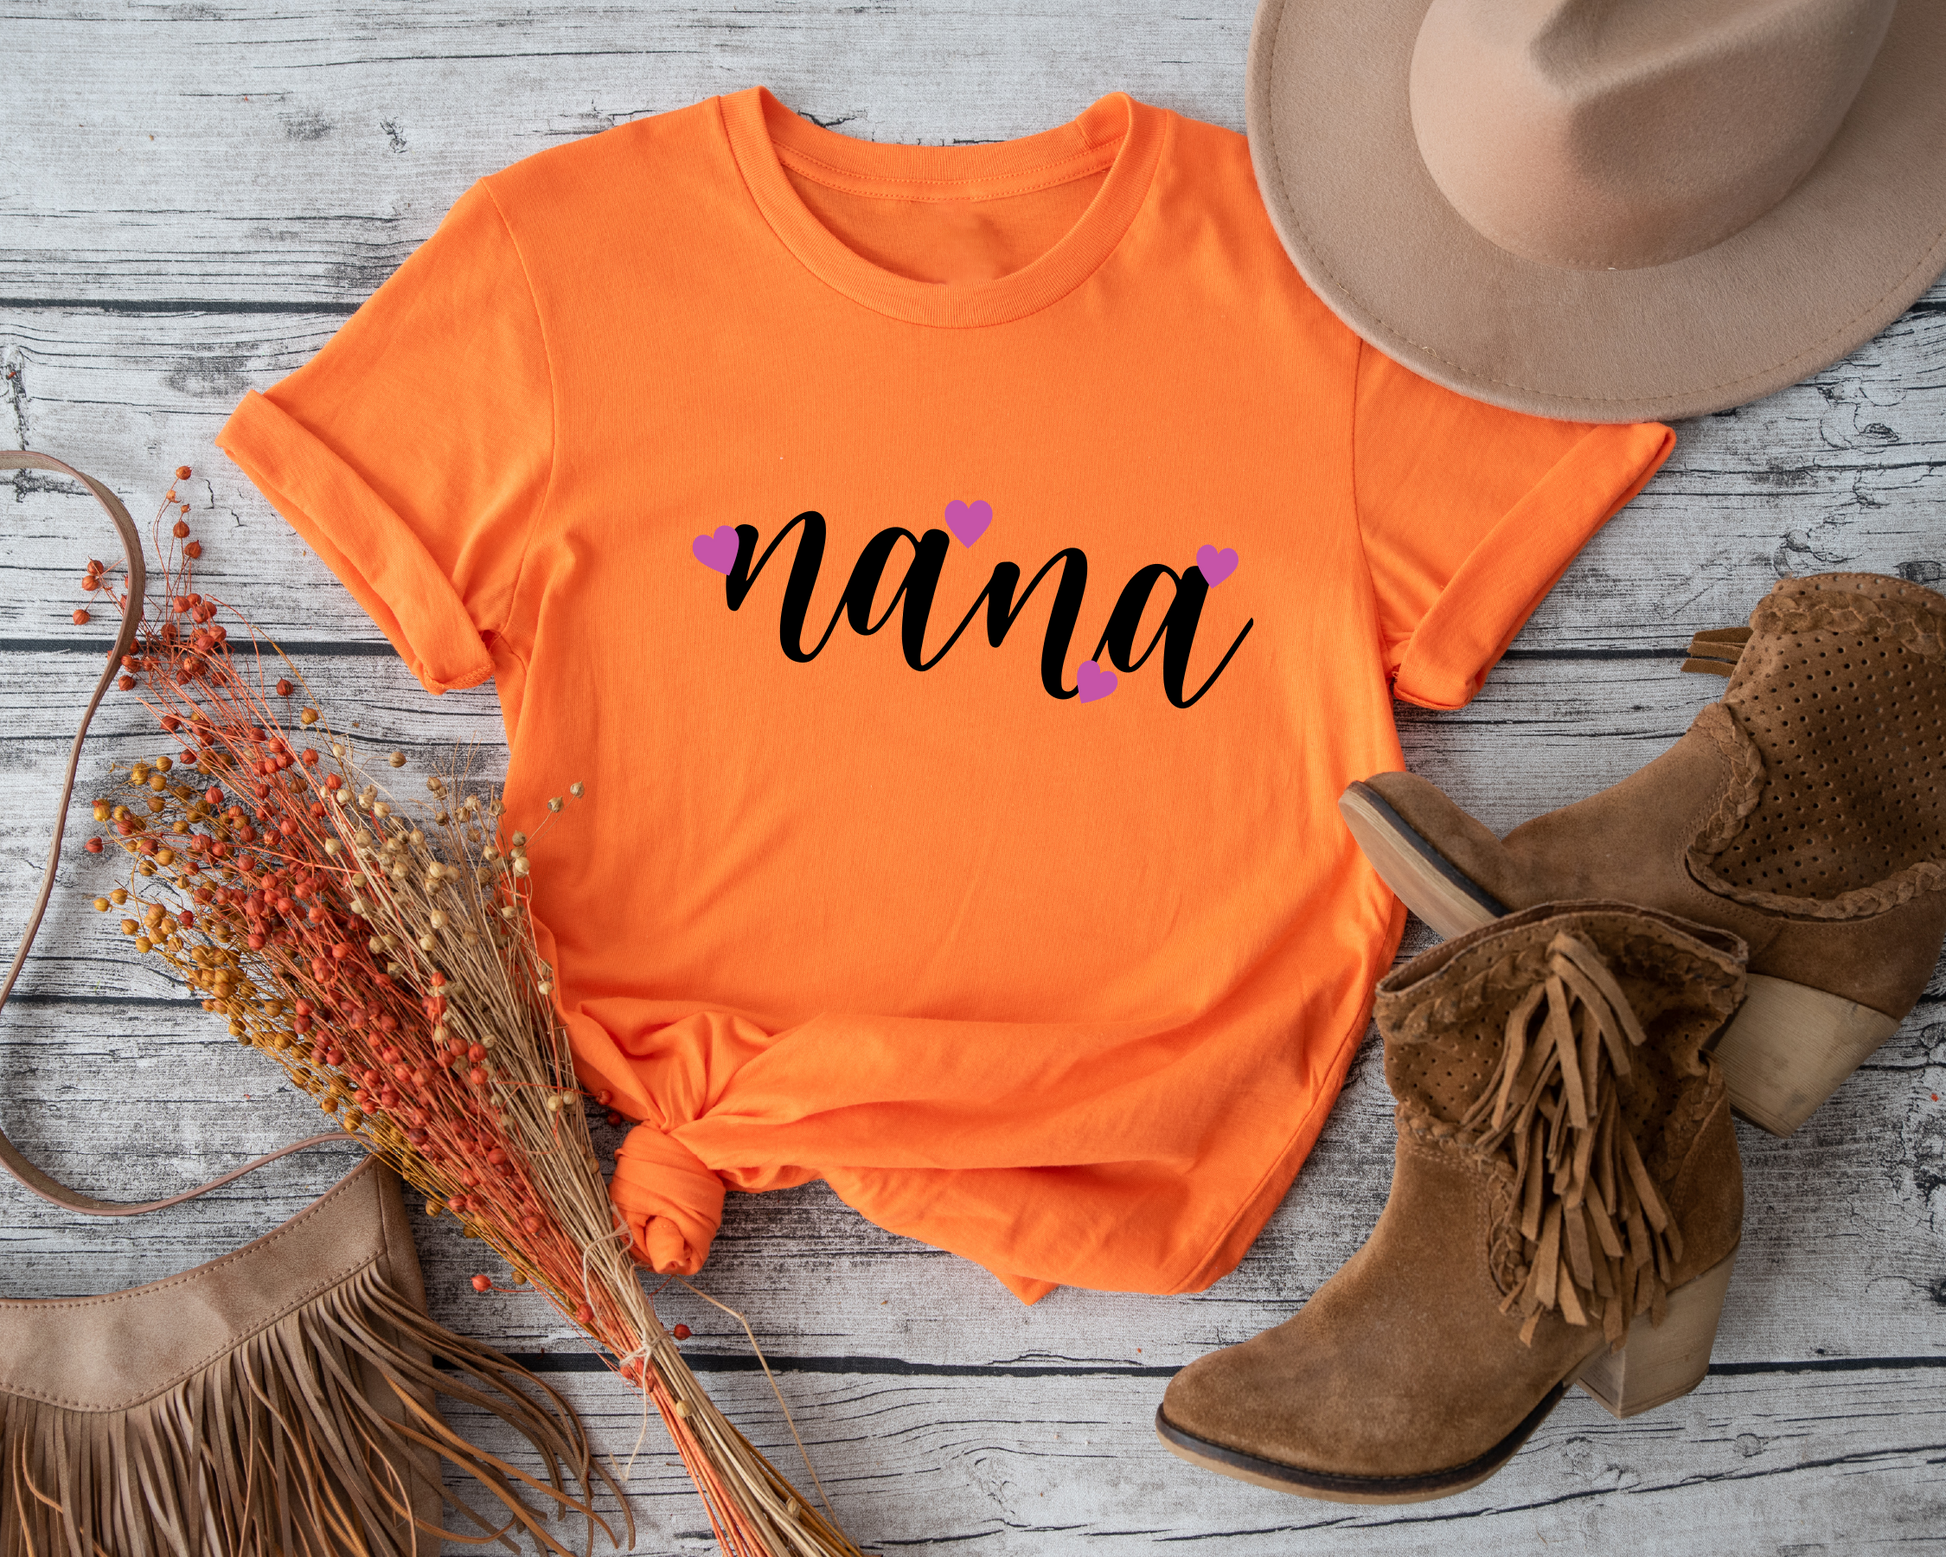 Nana T-Shirt: Celebrating the love and bond between grandmothers and their grandchildren.